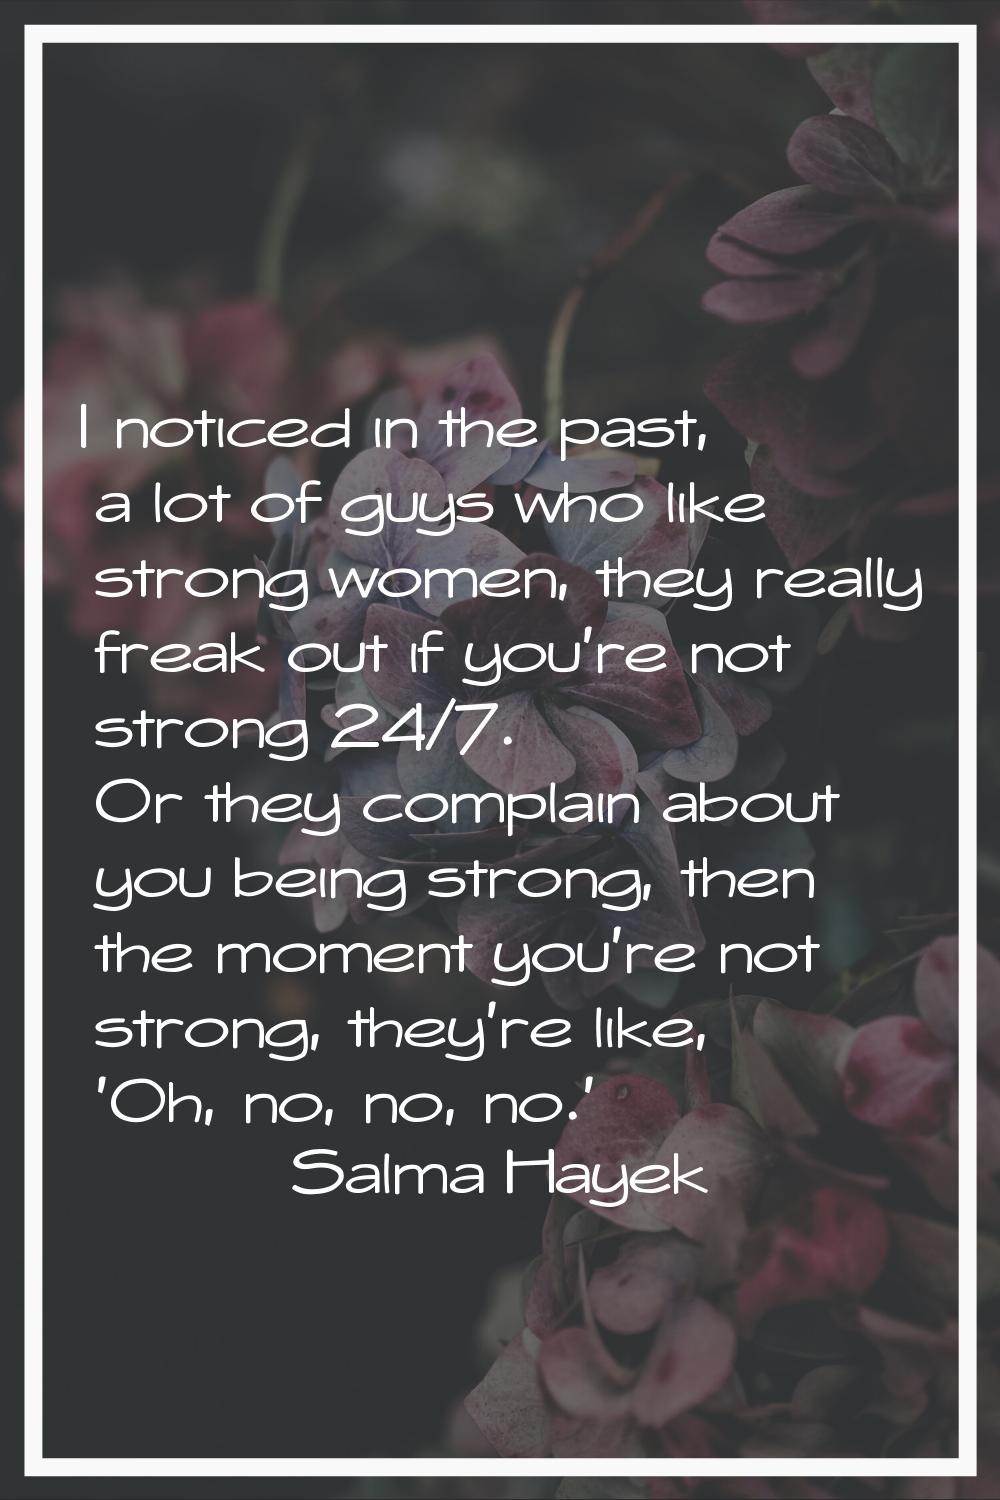 I noticed in the past, a lot of guys who like strong women, they really freak out if you're not str